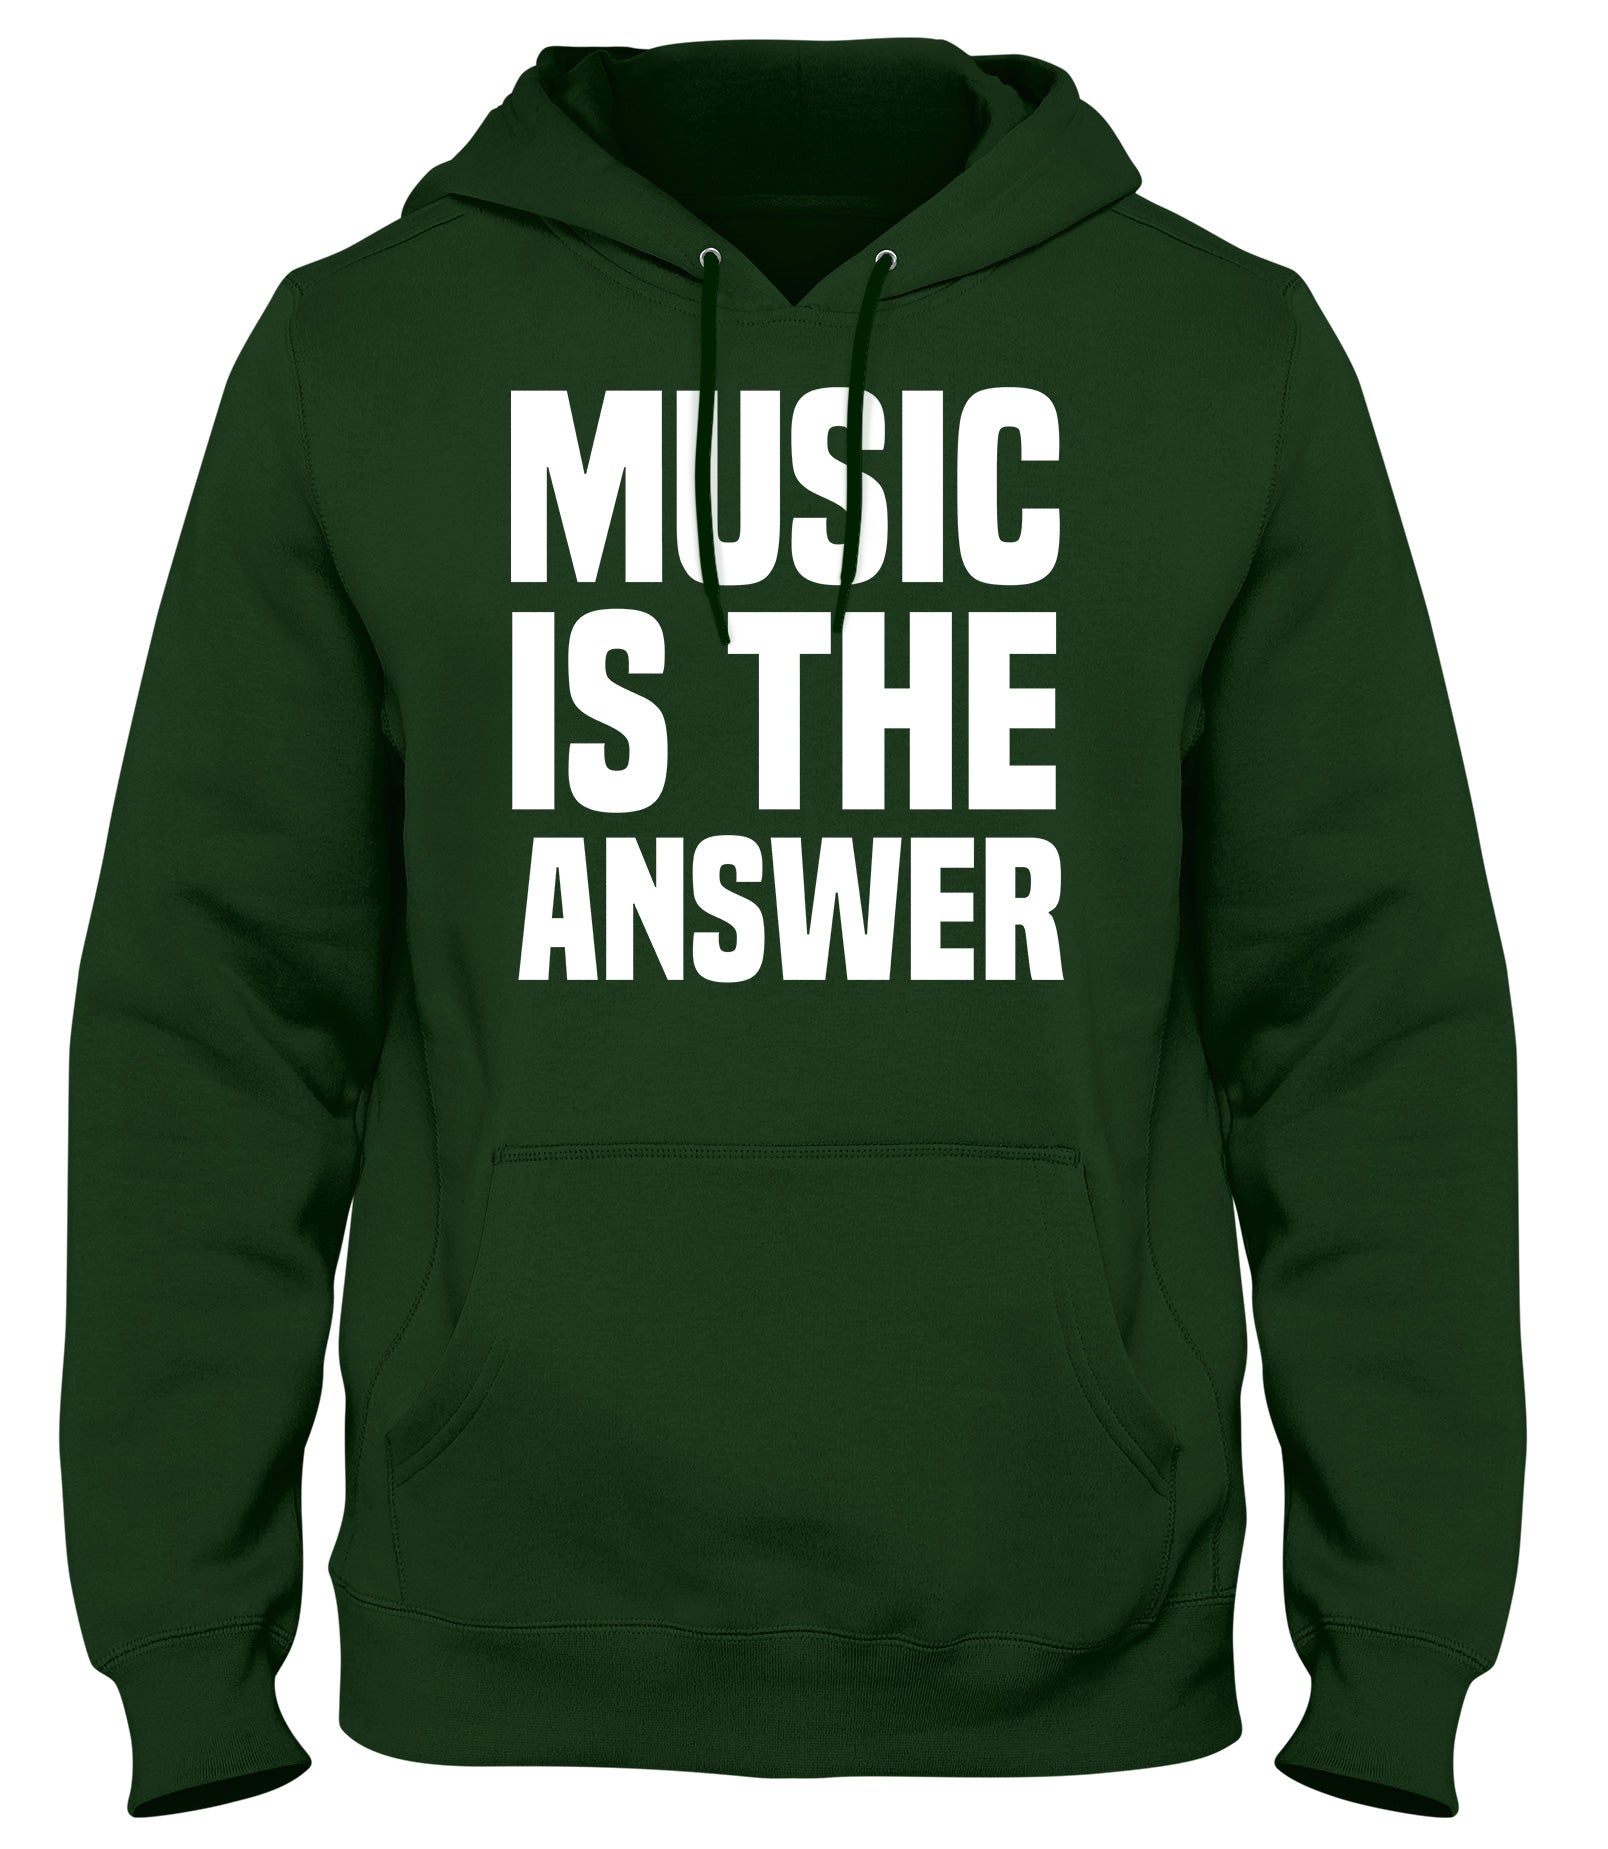 MUSIC IS THE ANSWER MENS WOMENS UNISEX FUNNY HOODIE